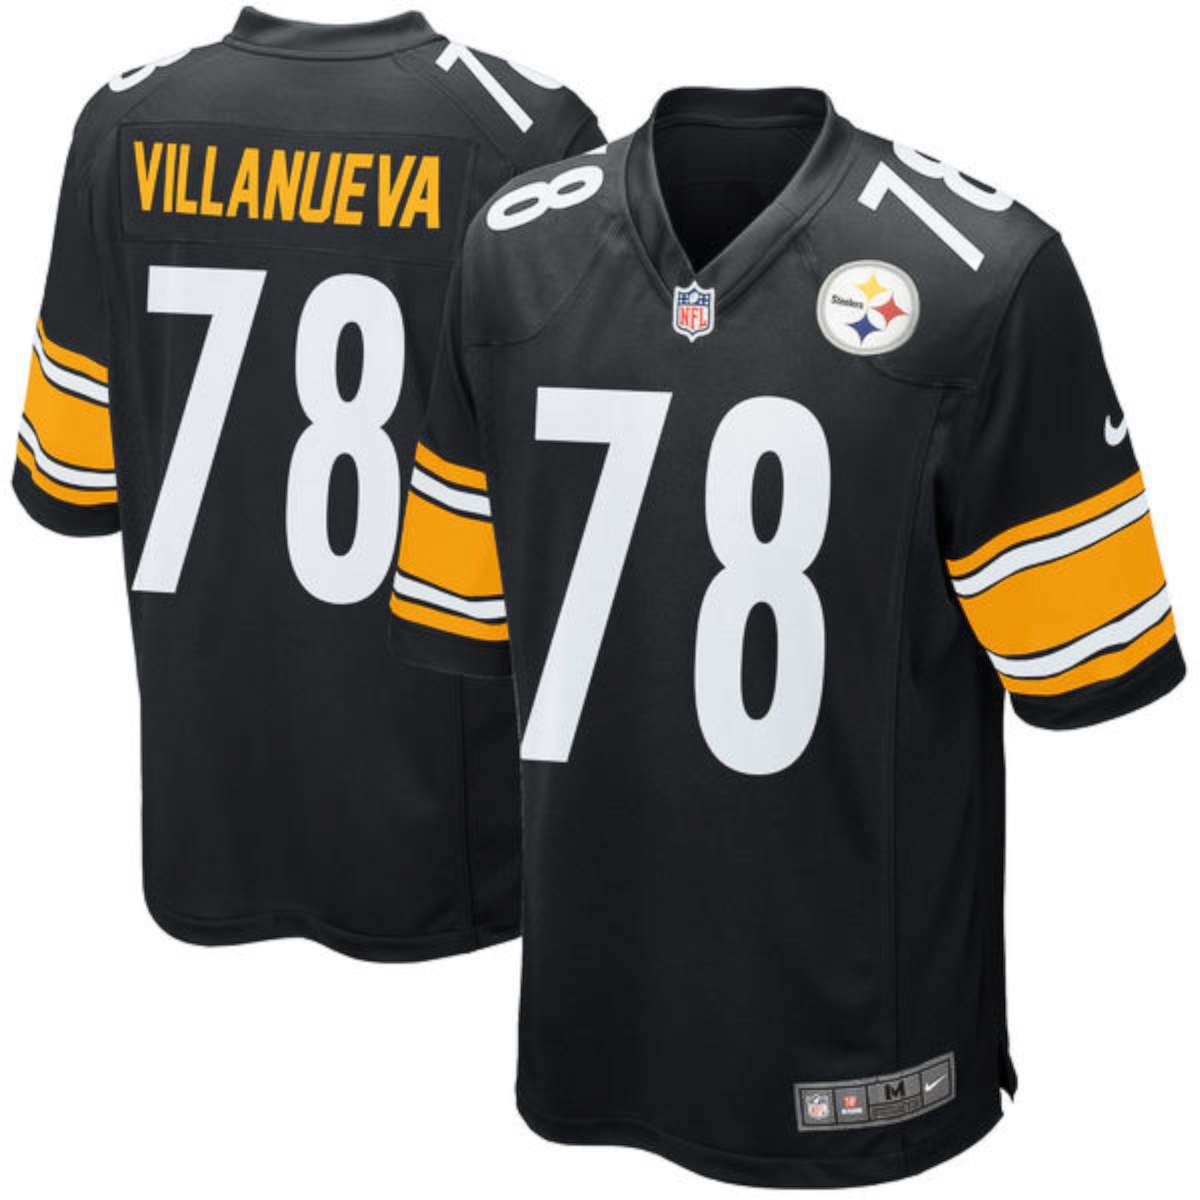 Alejandro Villanueva's jersey becomes a top seller after he (accidentally)  stands during anthem